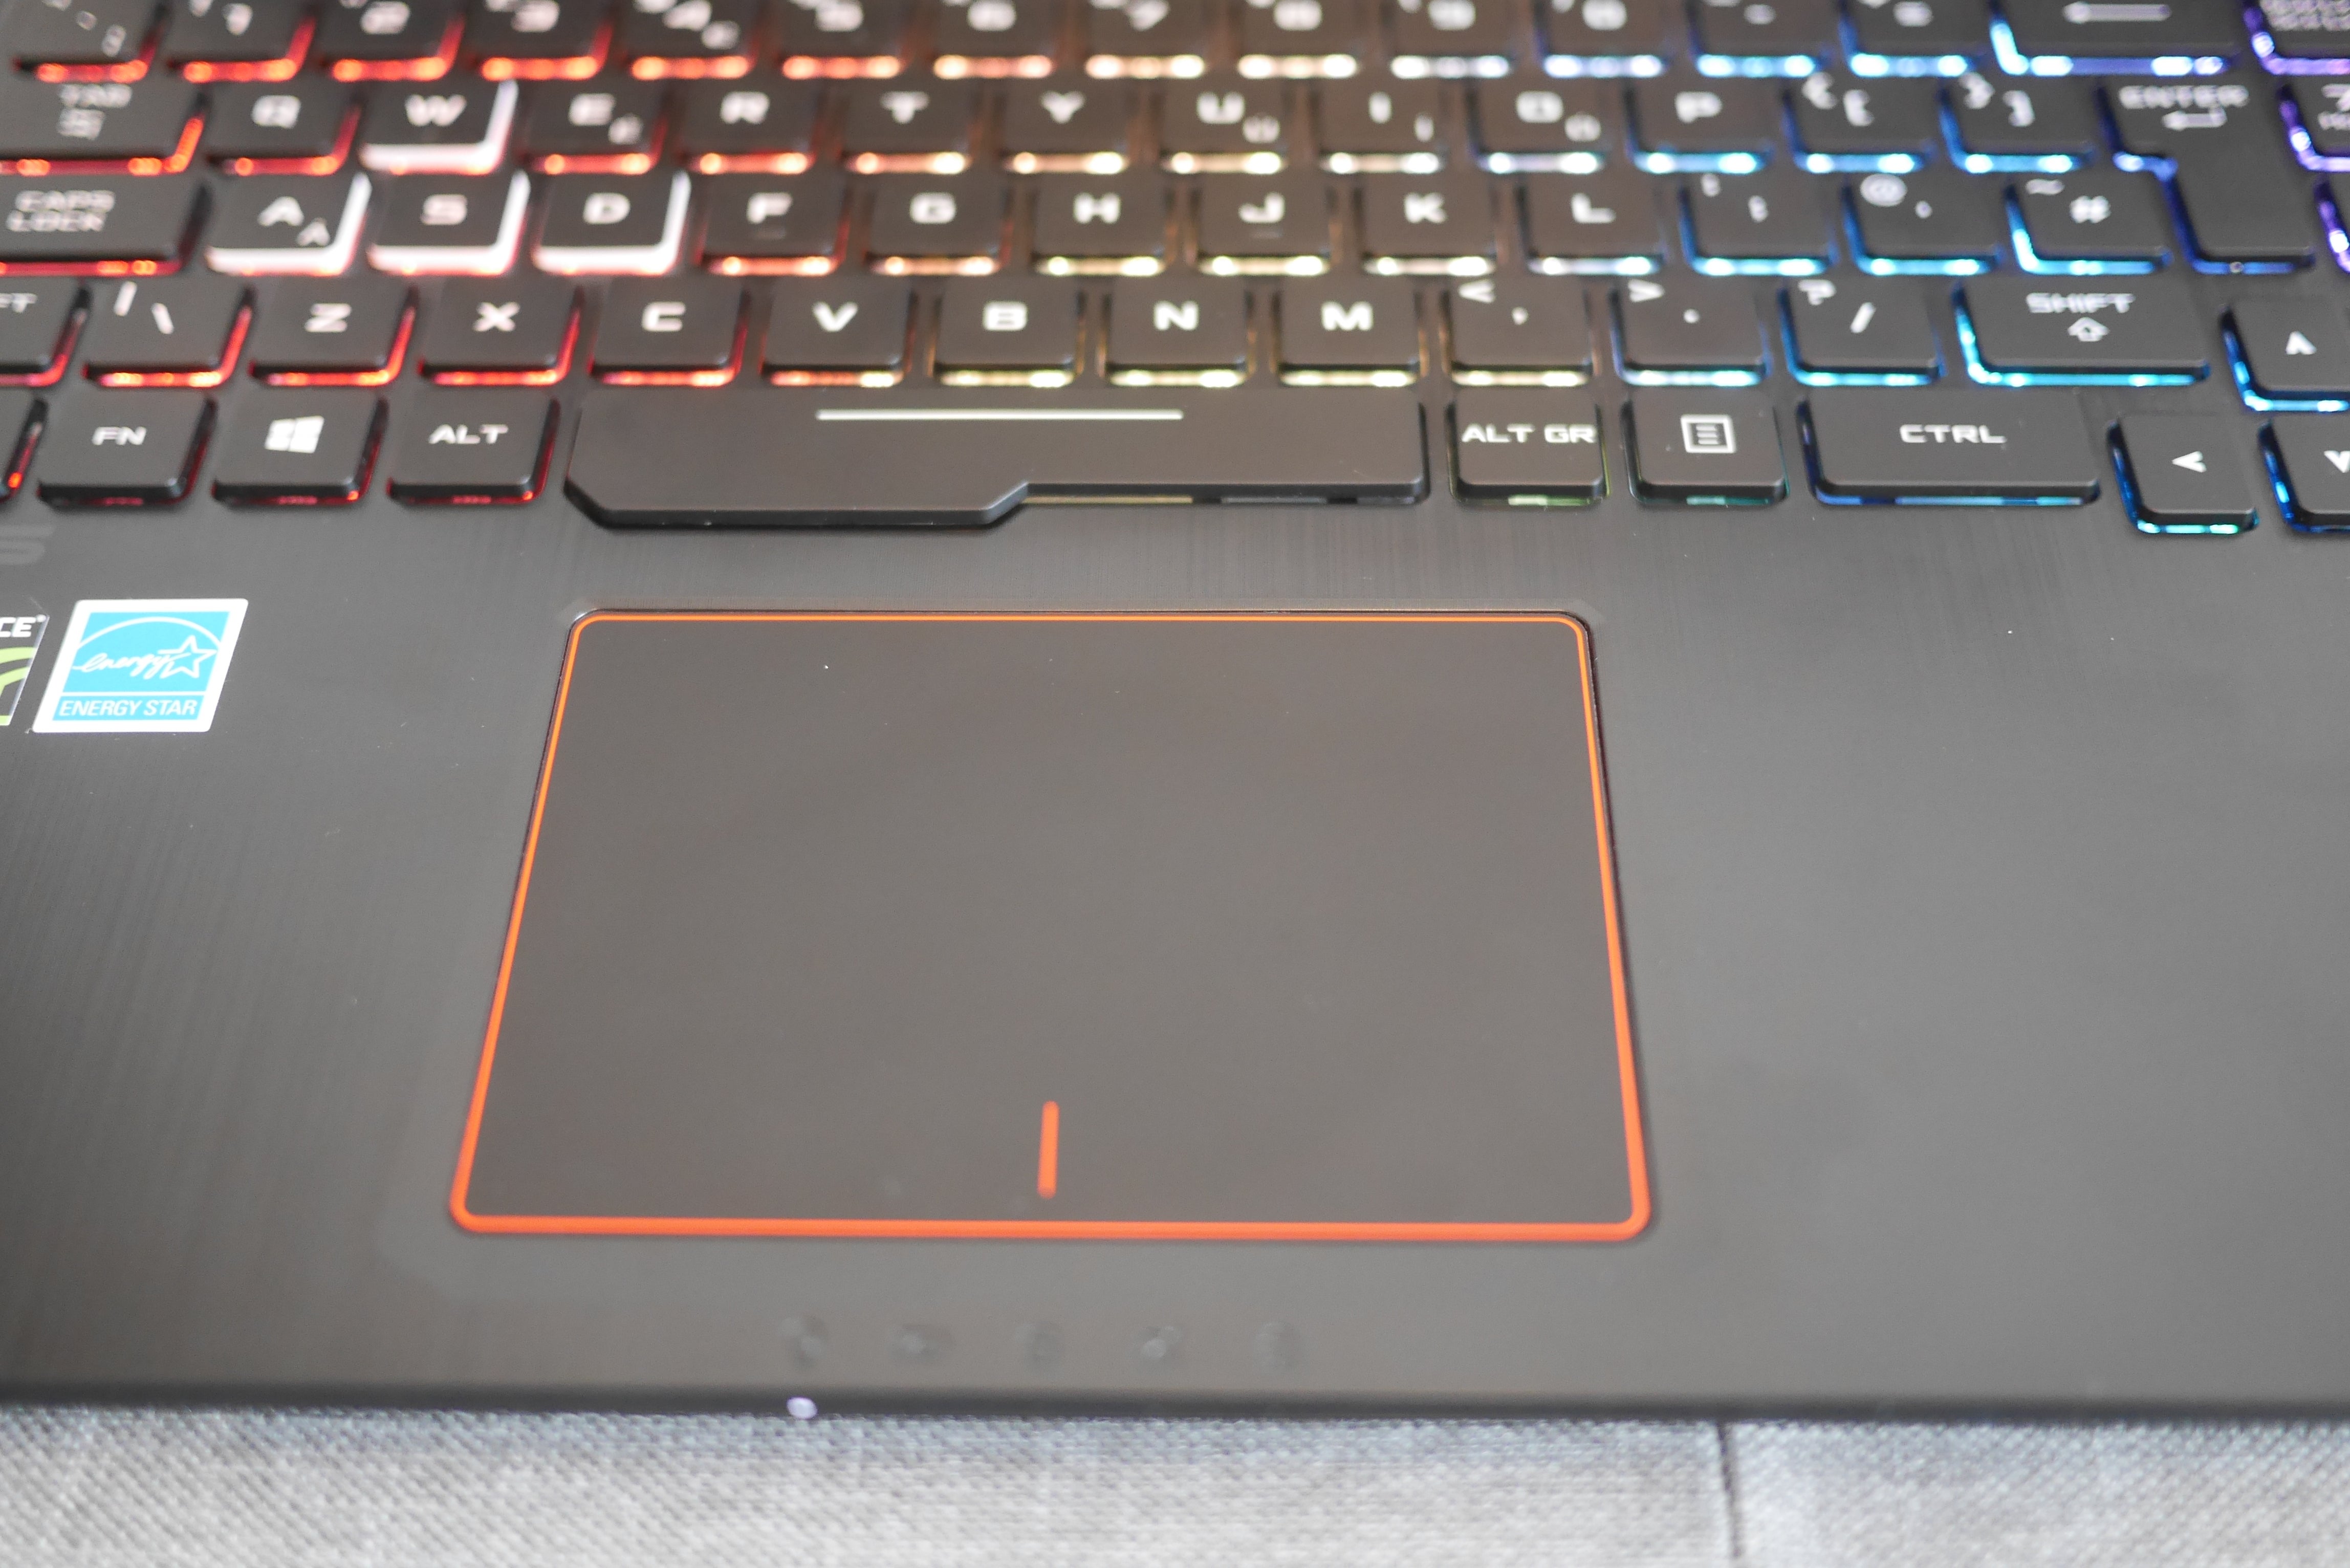 Asus ROG STRIX GL553 laptop keyboard and touchpad close-up.